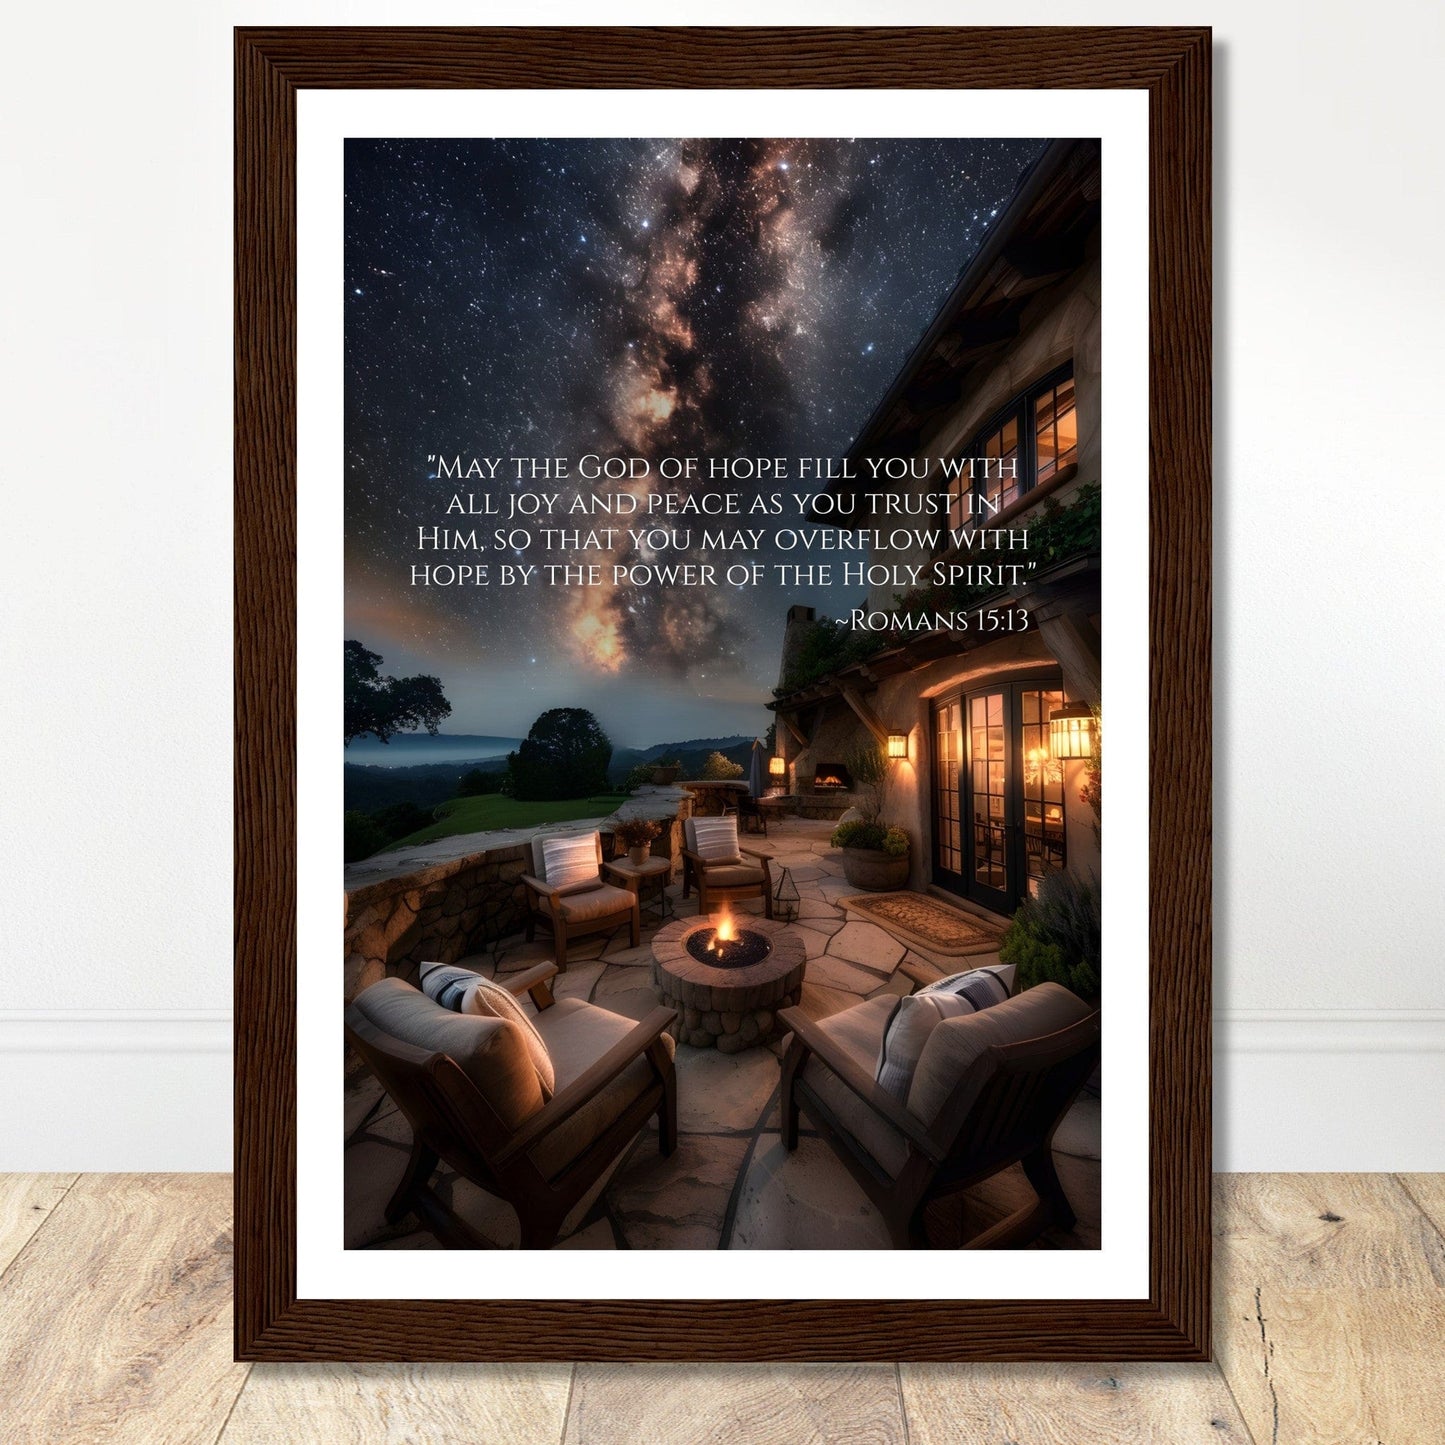 Coffee With My Father Print Material A4 21x29.7 cm / 8x12″ / Premium Matte Paper Wooden Framed Poster / Dark wood frame God of Hope